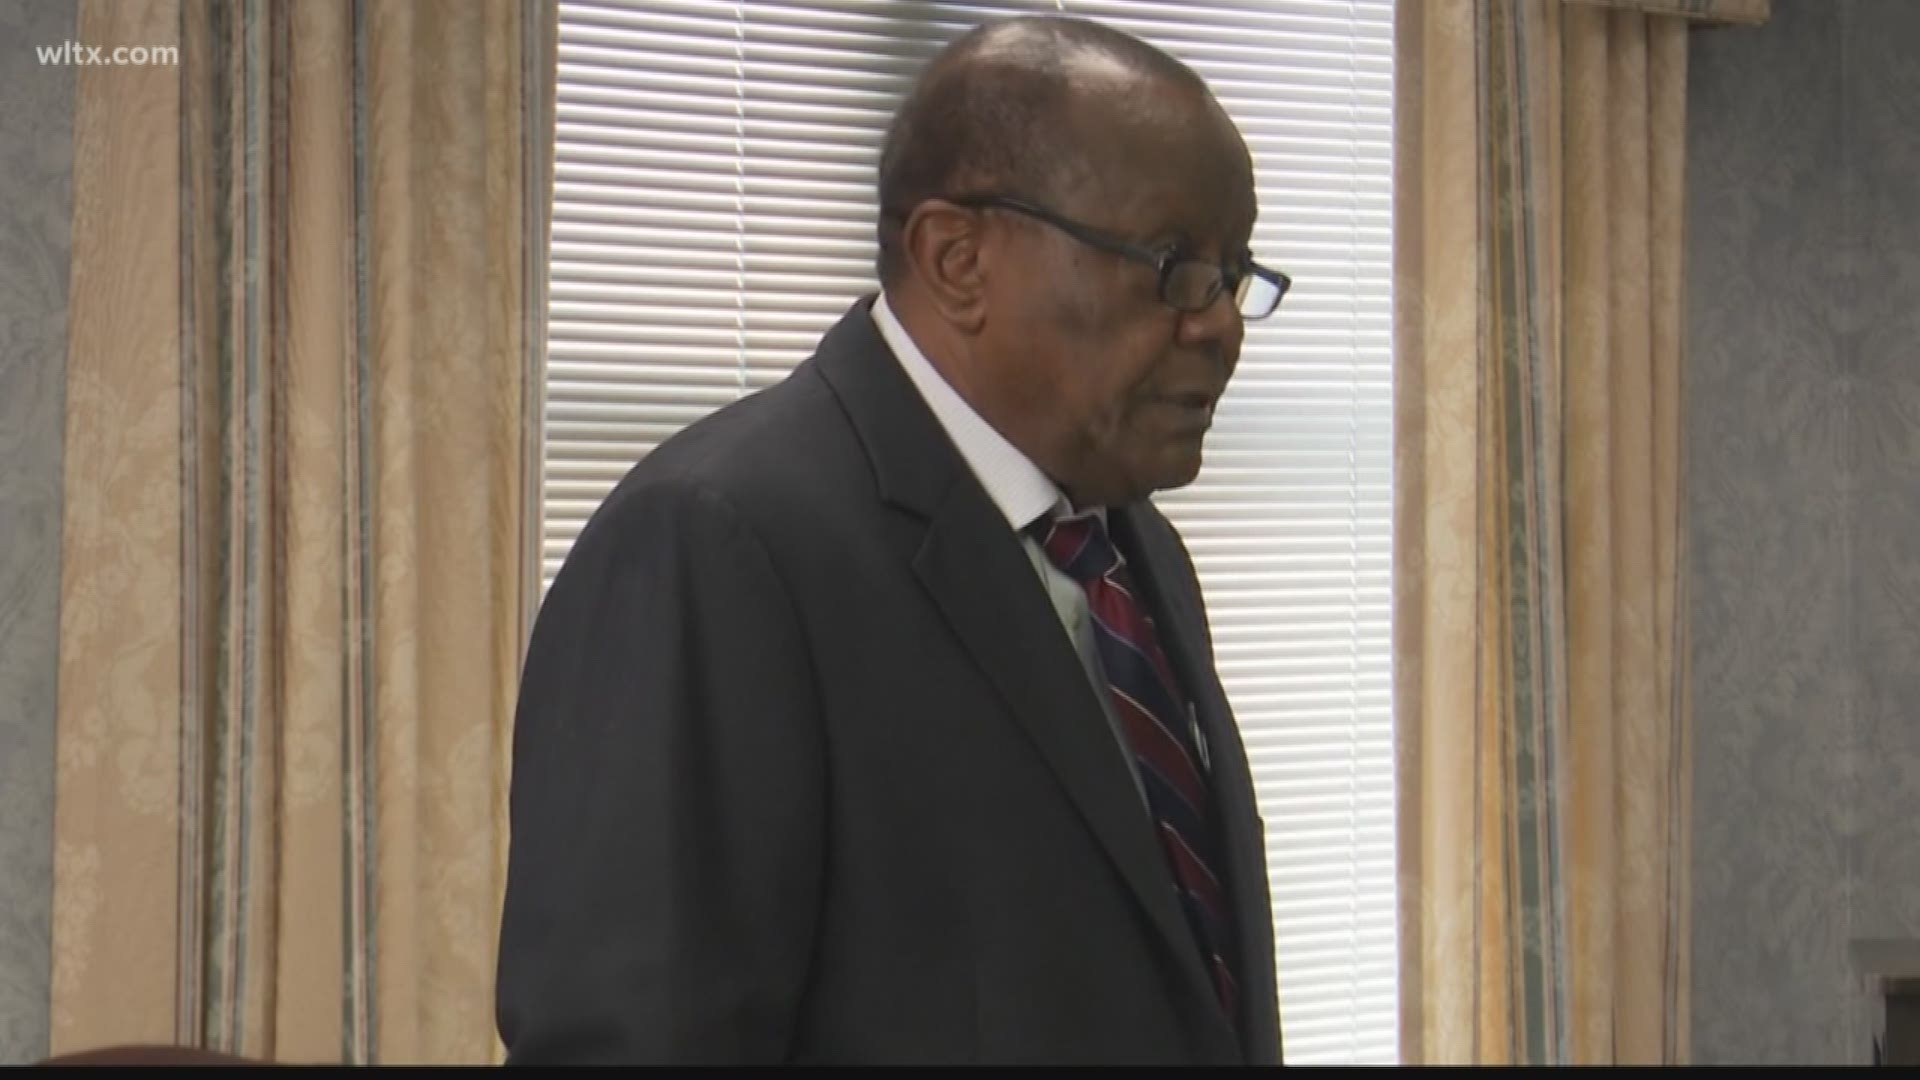 Director Gilbert Walker said they will put carbon monoxide detectors at every housing authority property that uses gas utilities or appliances.